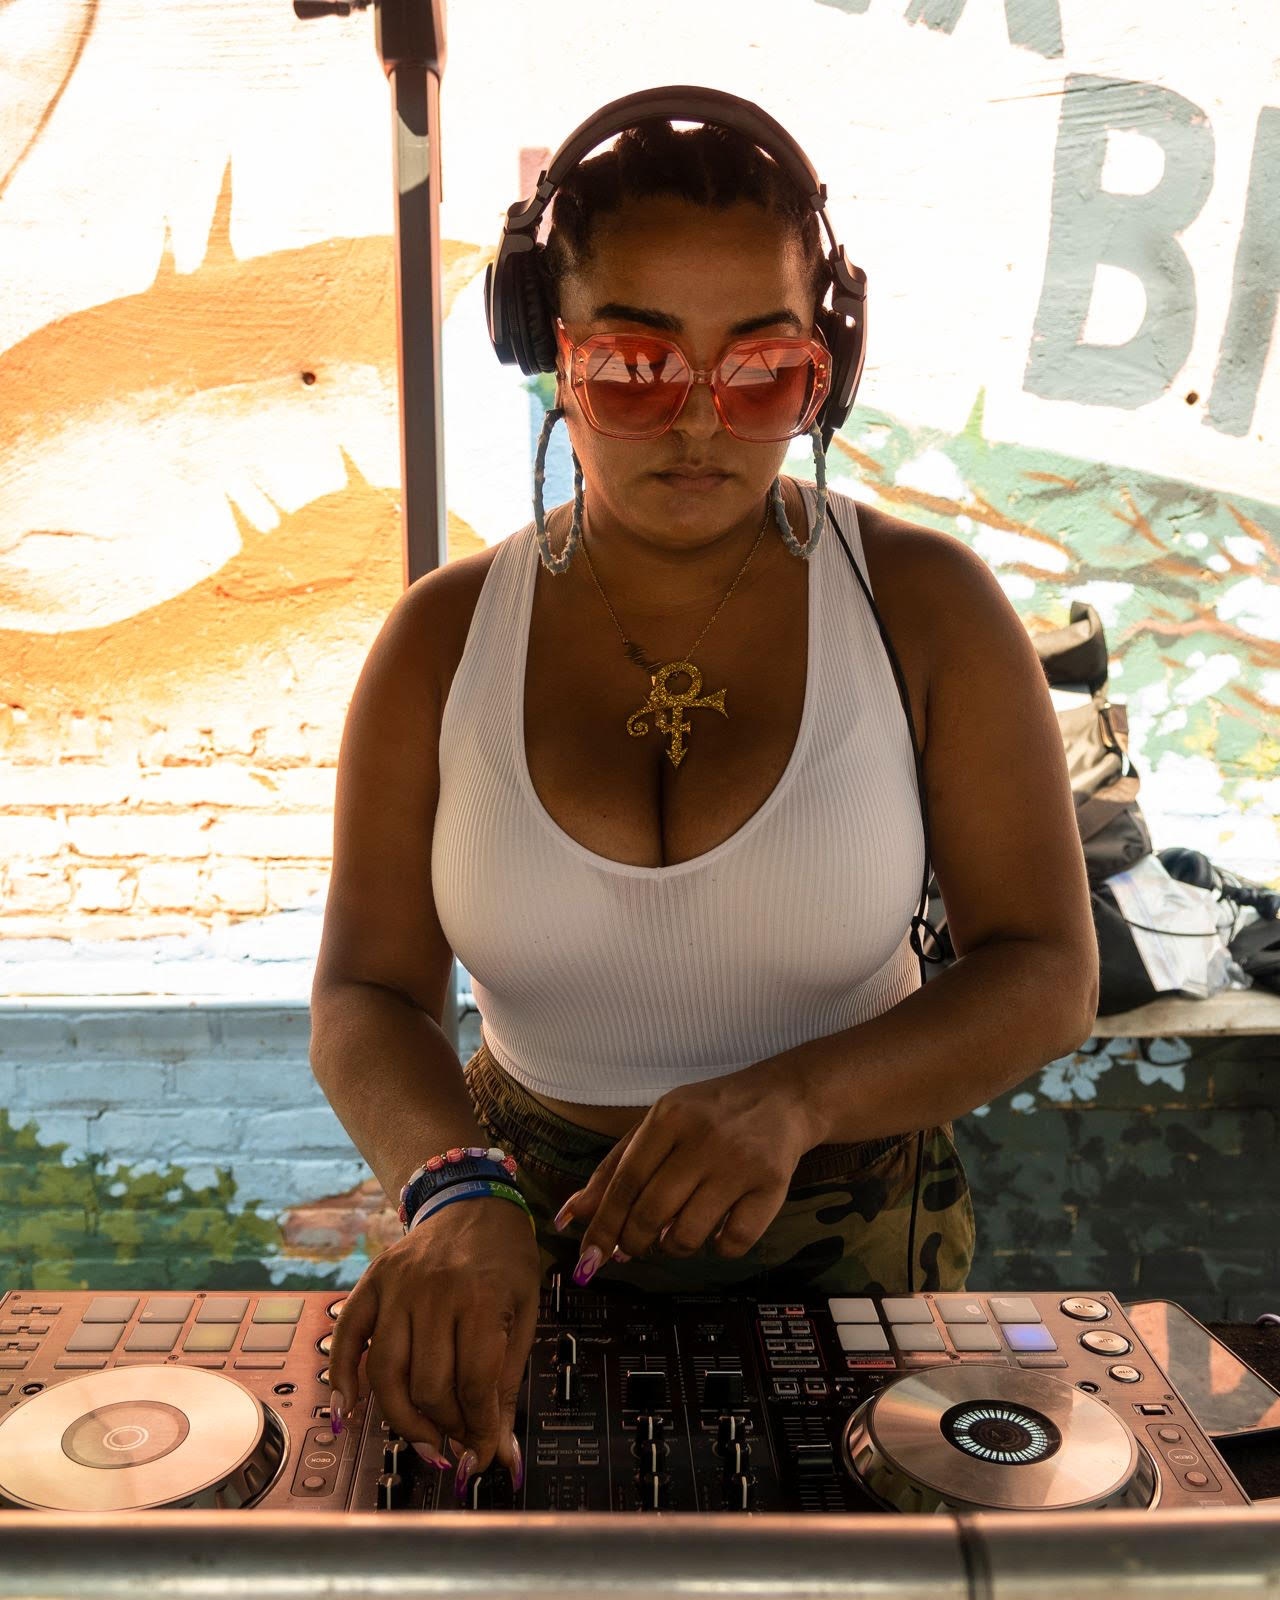 A Black woman DJs at an electronic controller. She looks down at her hands as they adjust controls on the panel. She wears a whit tank top, a gold necklace with the symbol for the Artist formerly known as Prince, and headphones. 